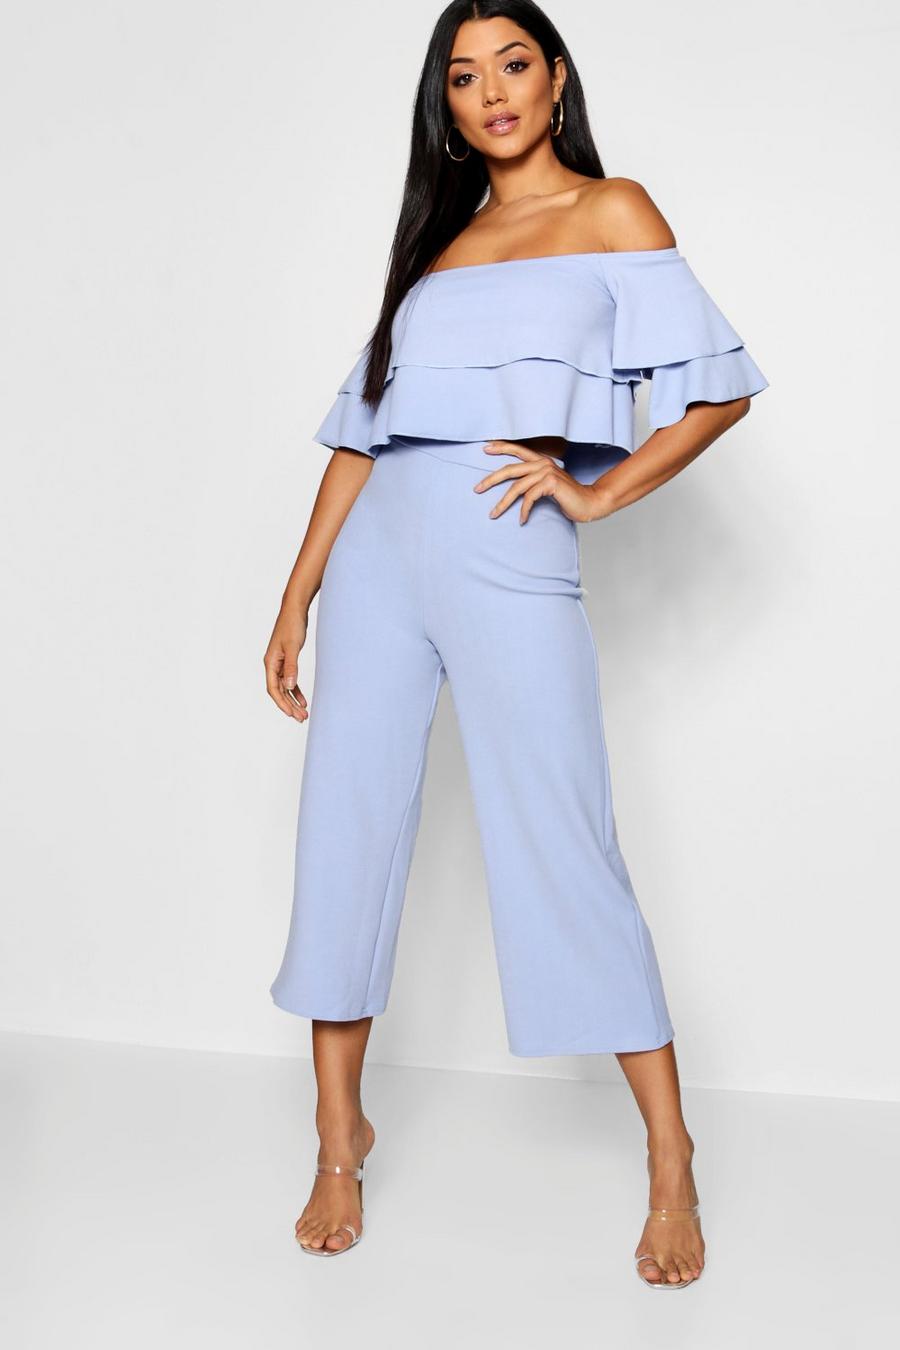 Double Tube Top And Culotte Two-Piece Set | boohoo